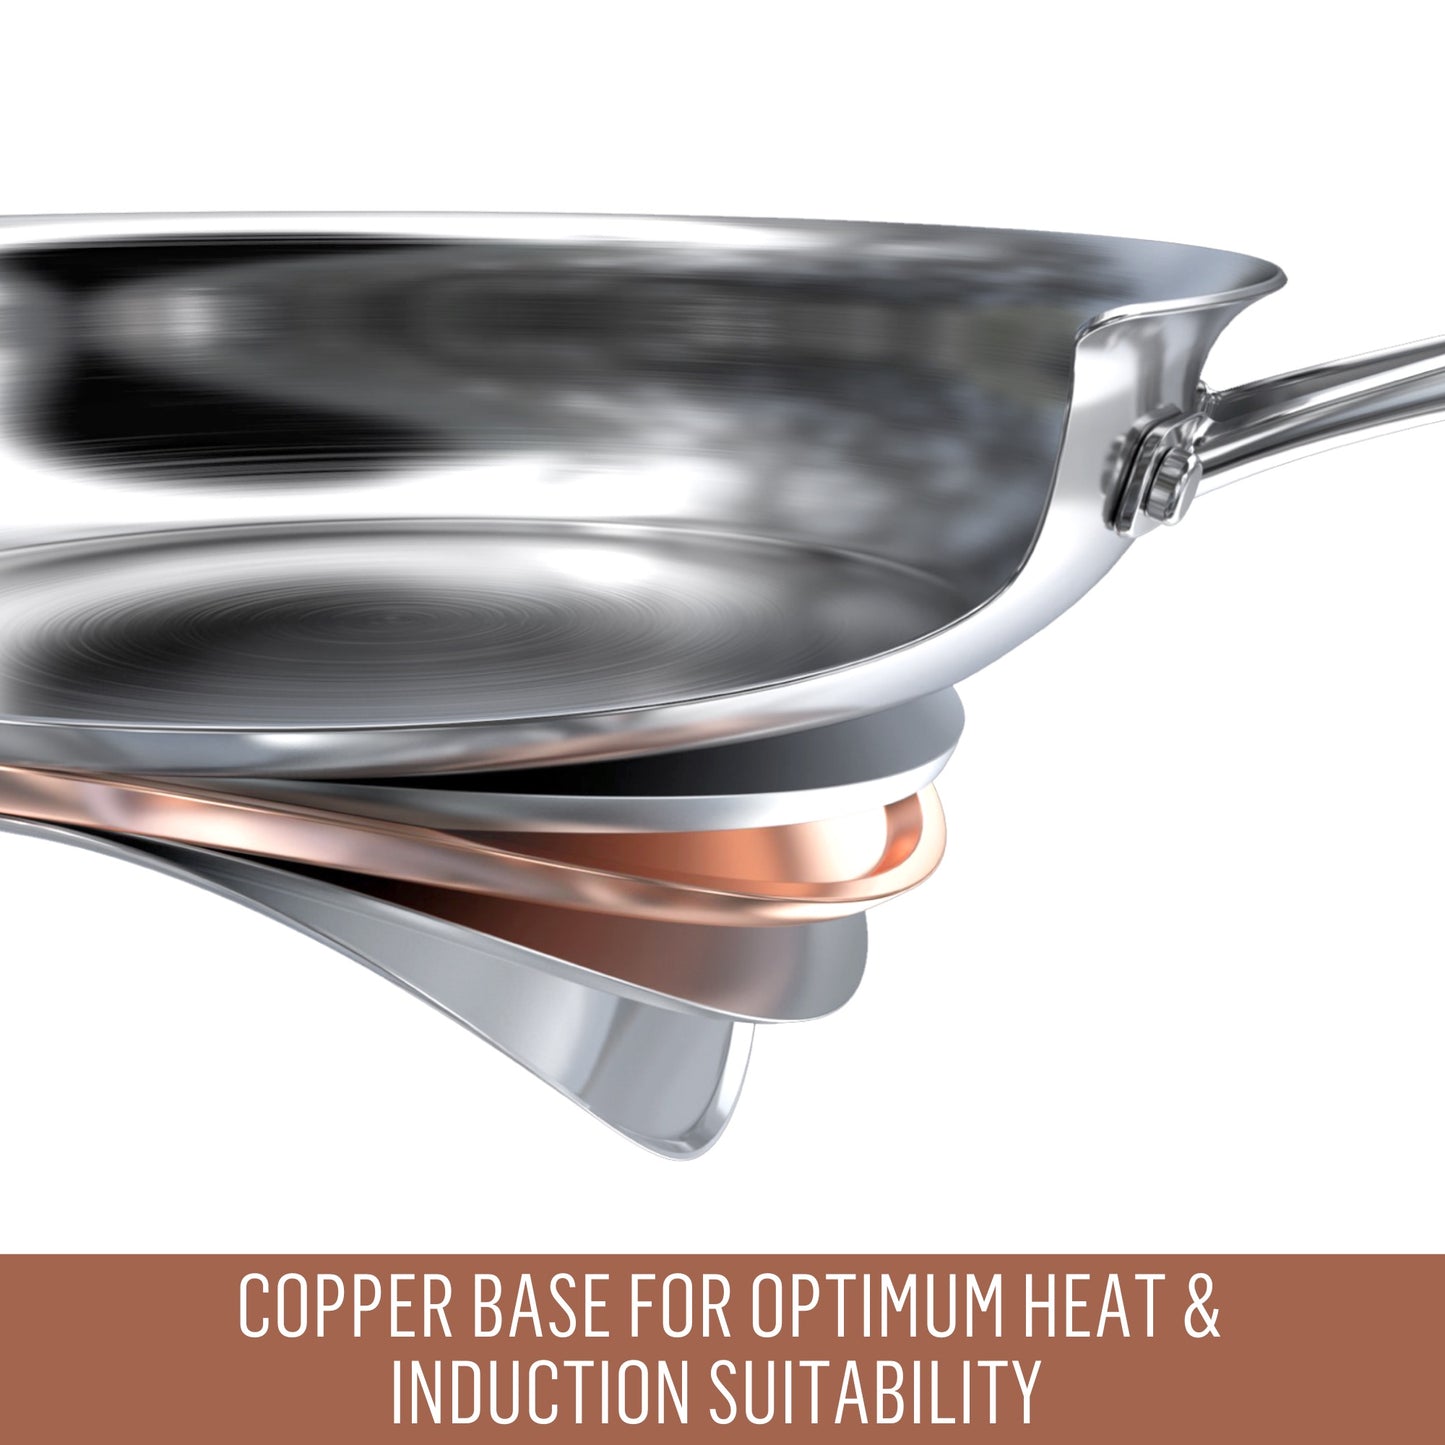 Essteele Per Vita Copper Base Stainless Steel Induction Open French Skillet 28cm